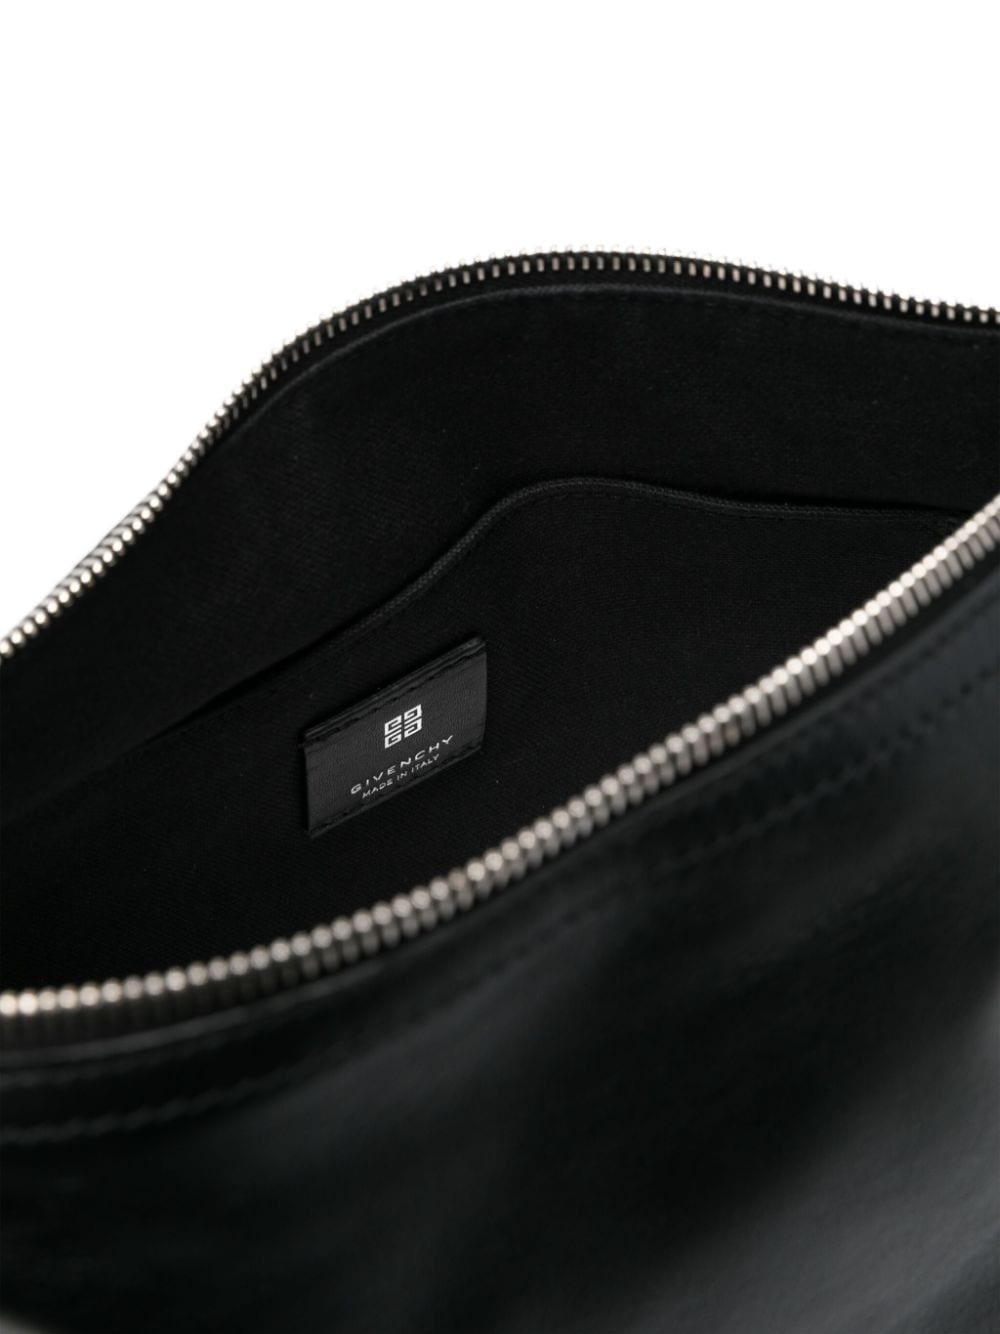 Voyou leather bag - 4